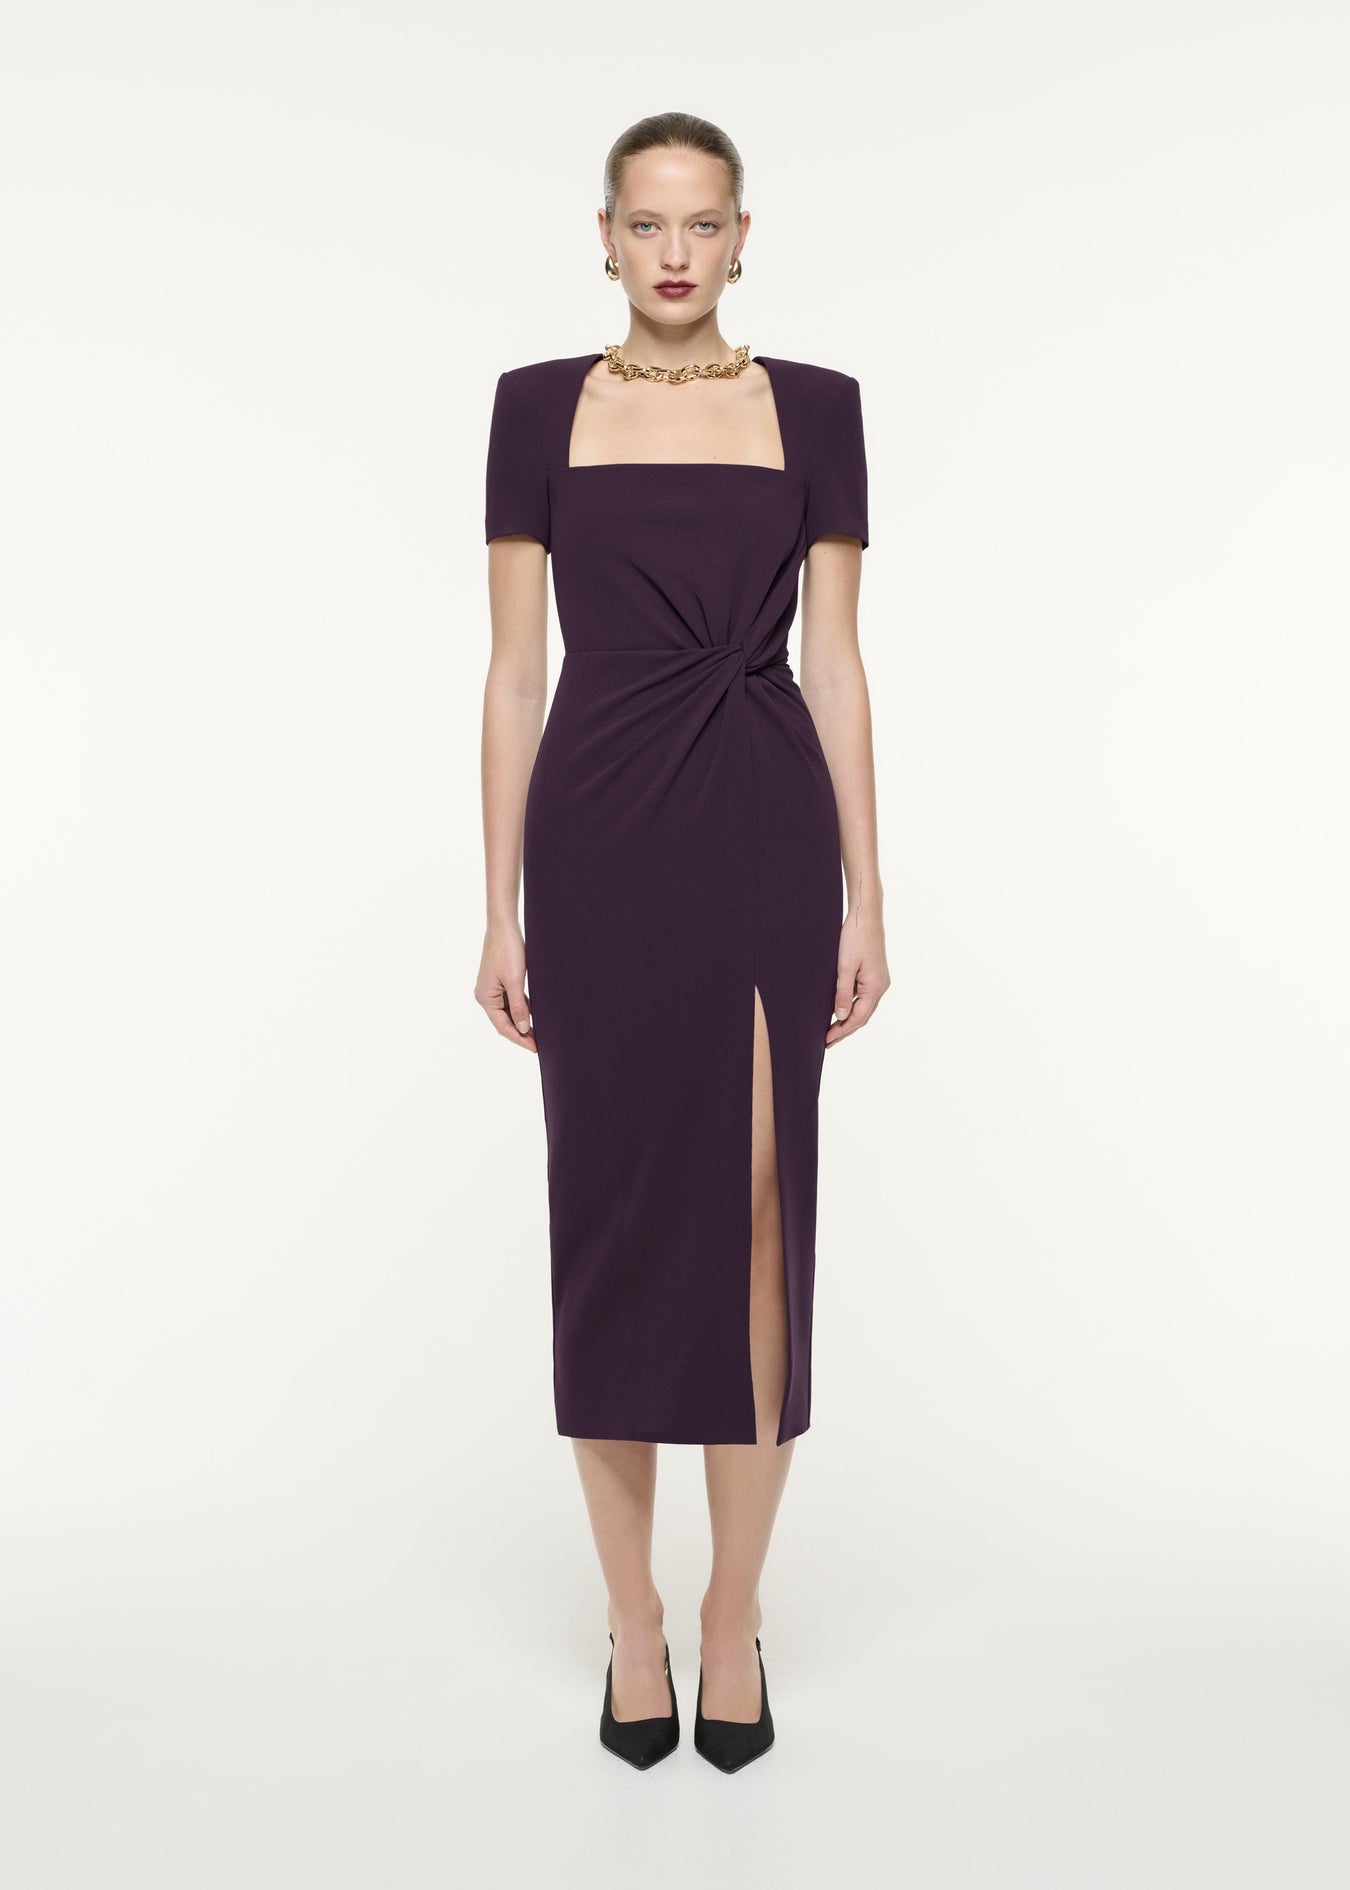 A front view image of a model wearing the Short Sleeve Heavy Cady Midi Dress in Aubergine